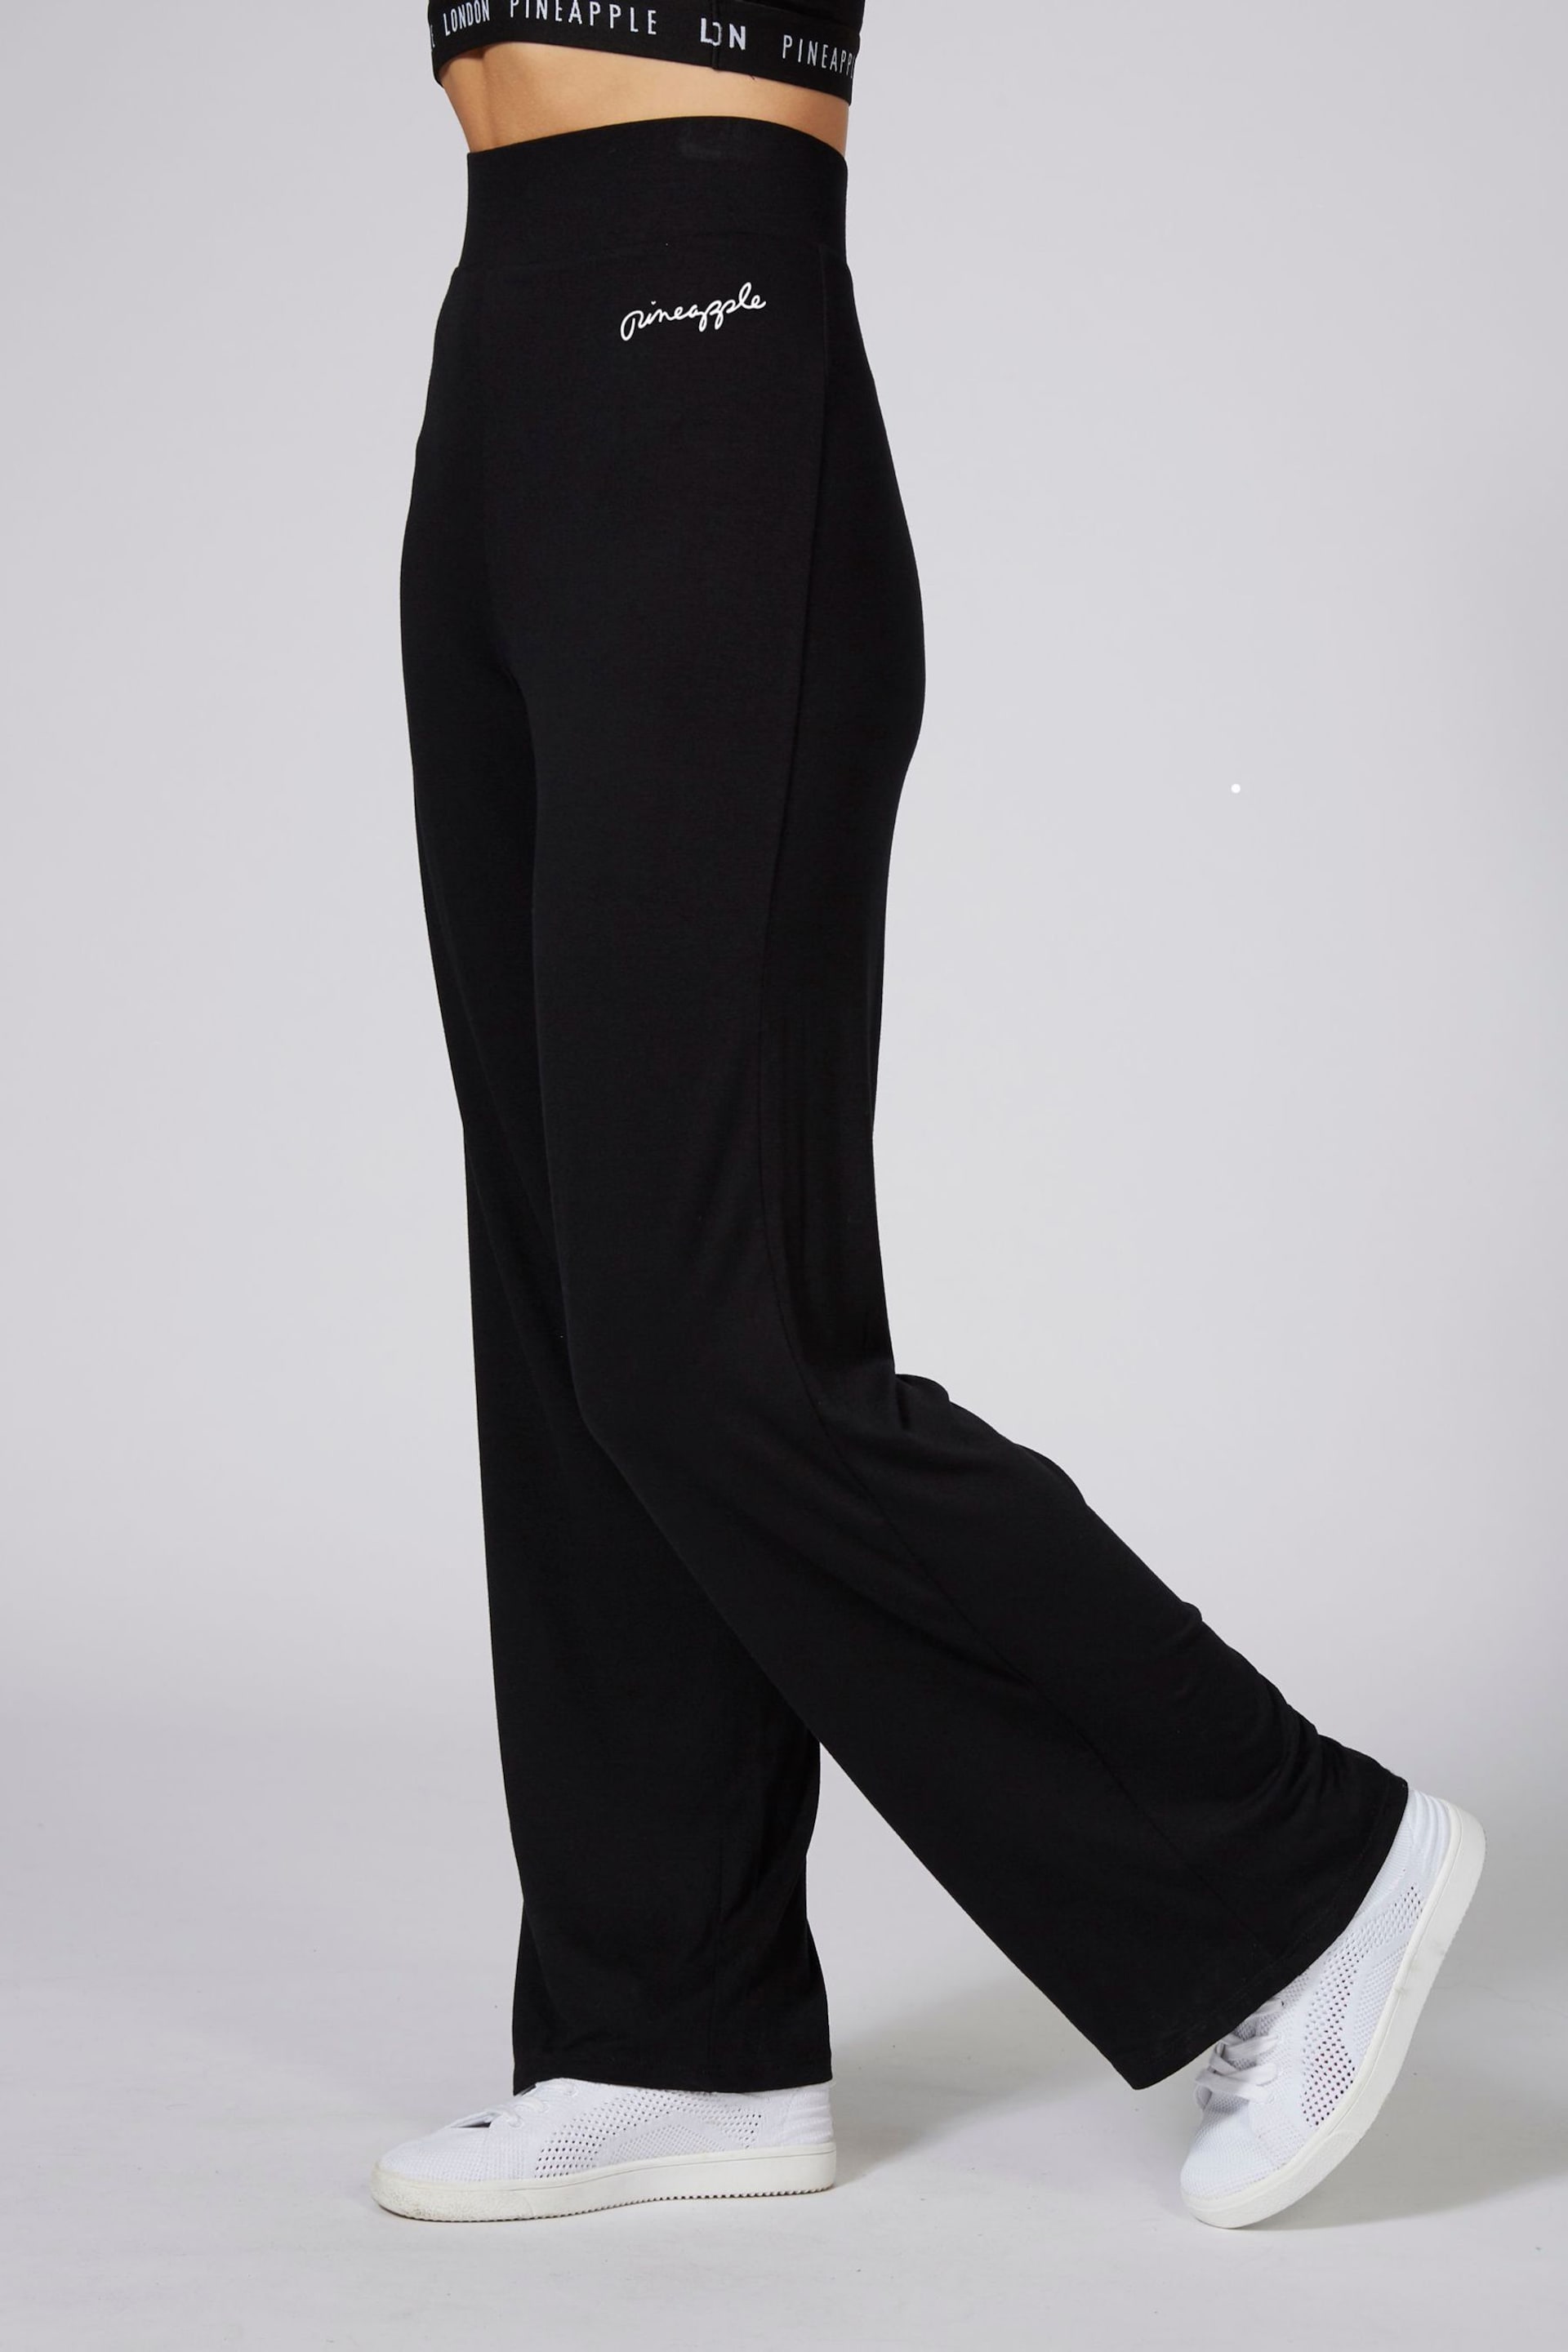 Pineapple Black Viscose Jersey Trousers - Image 1 of 3